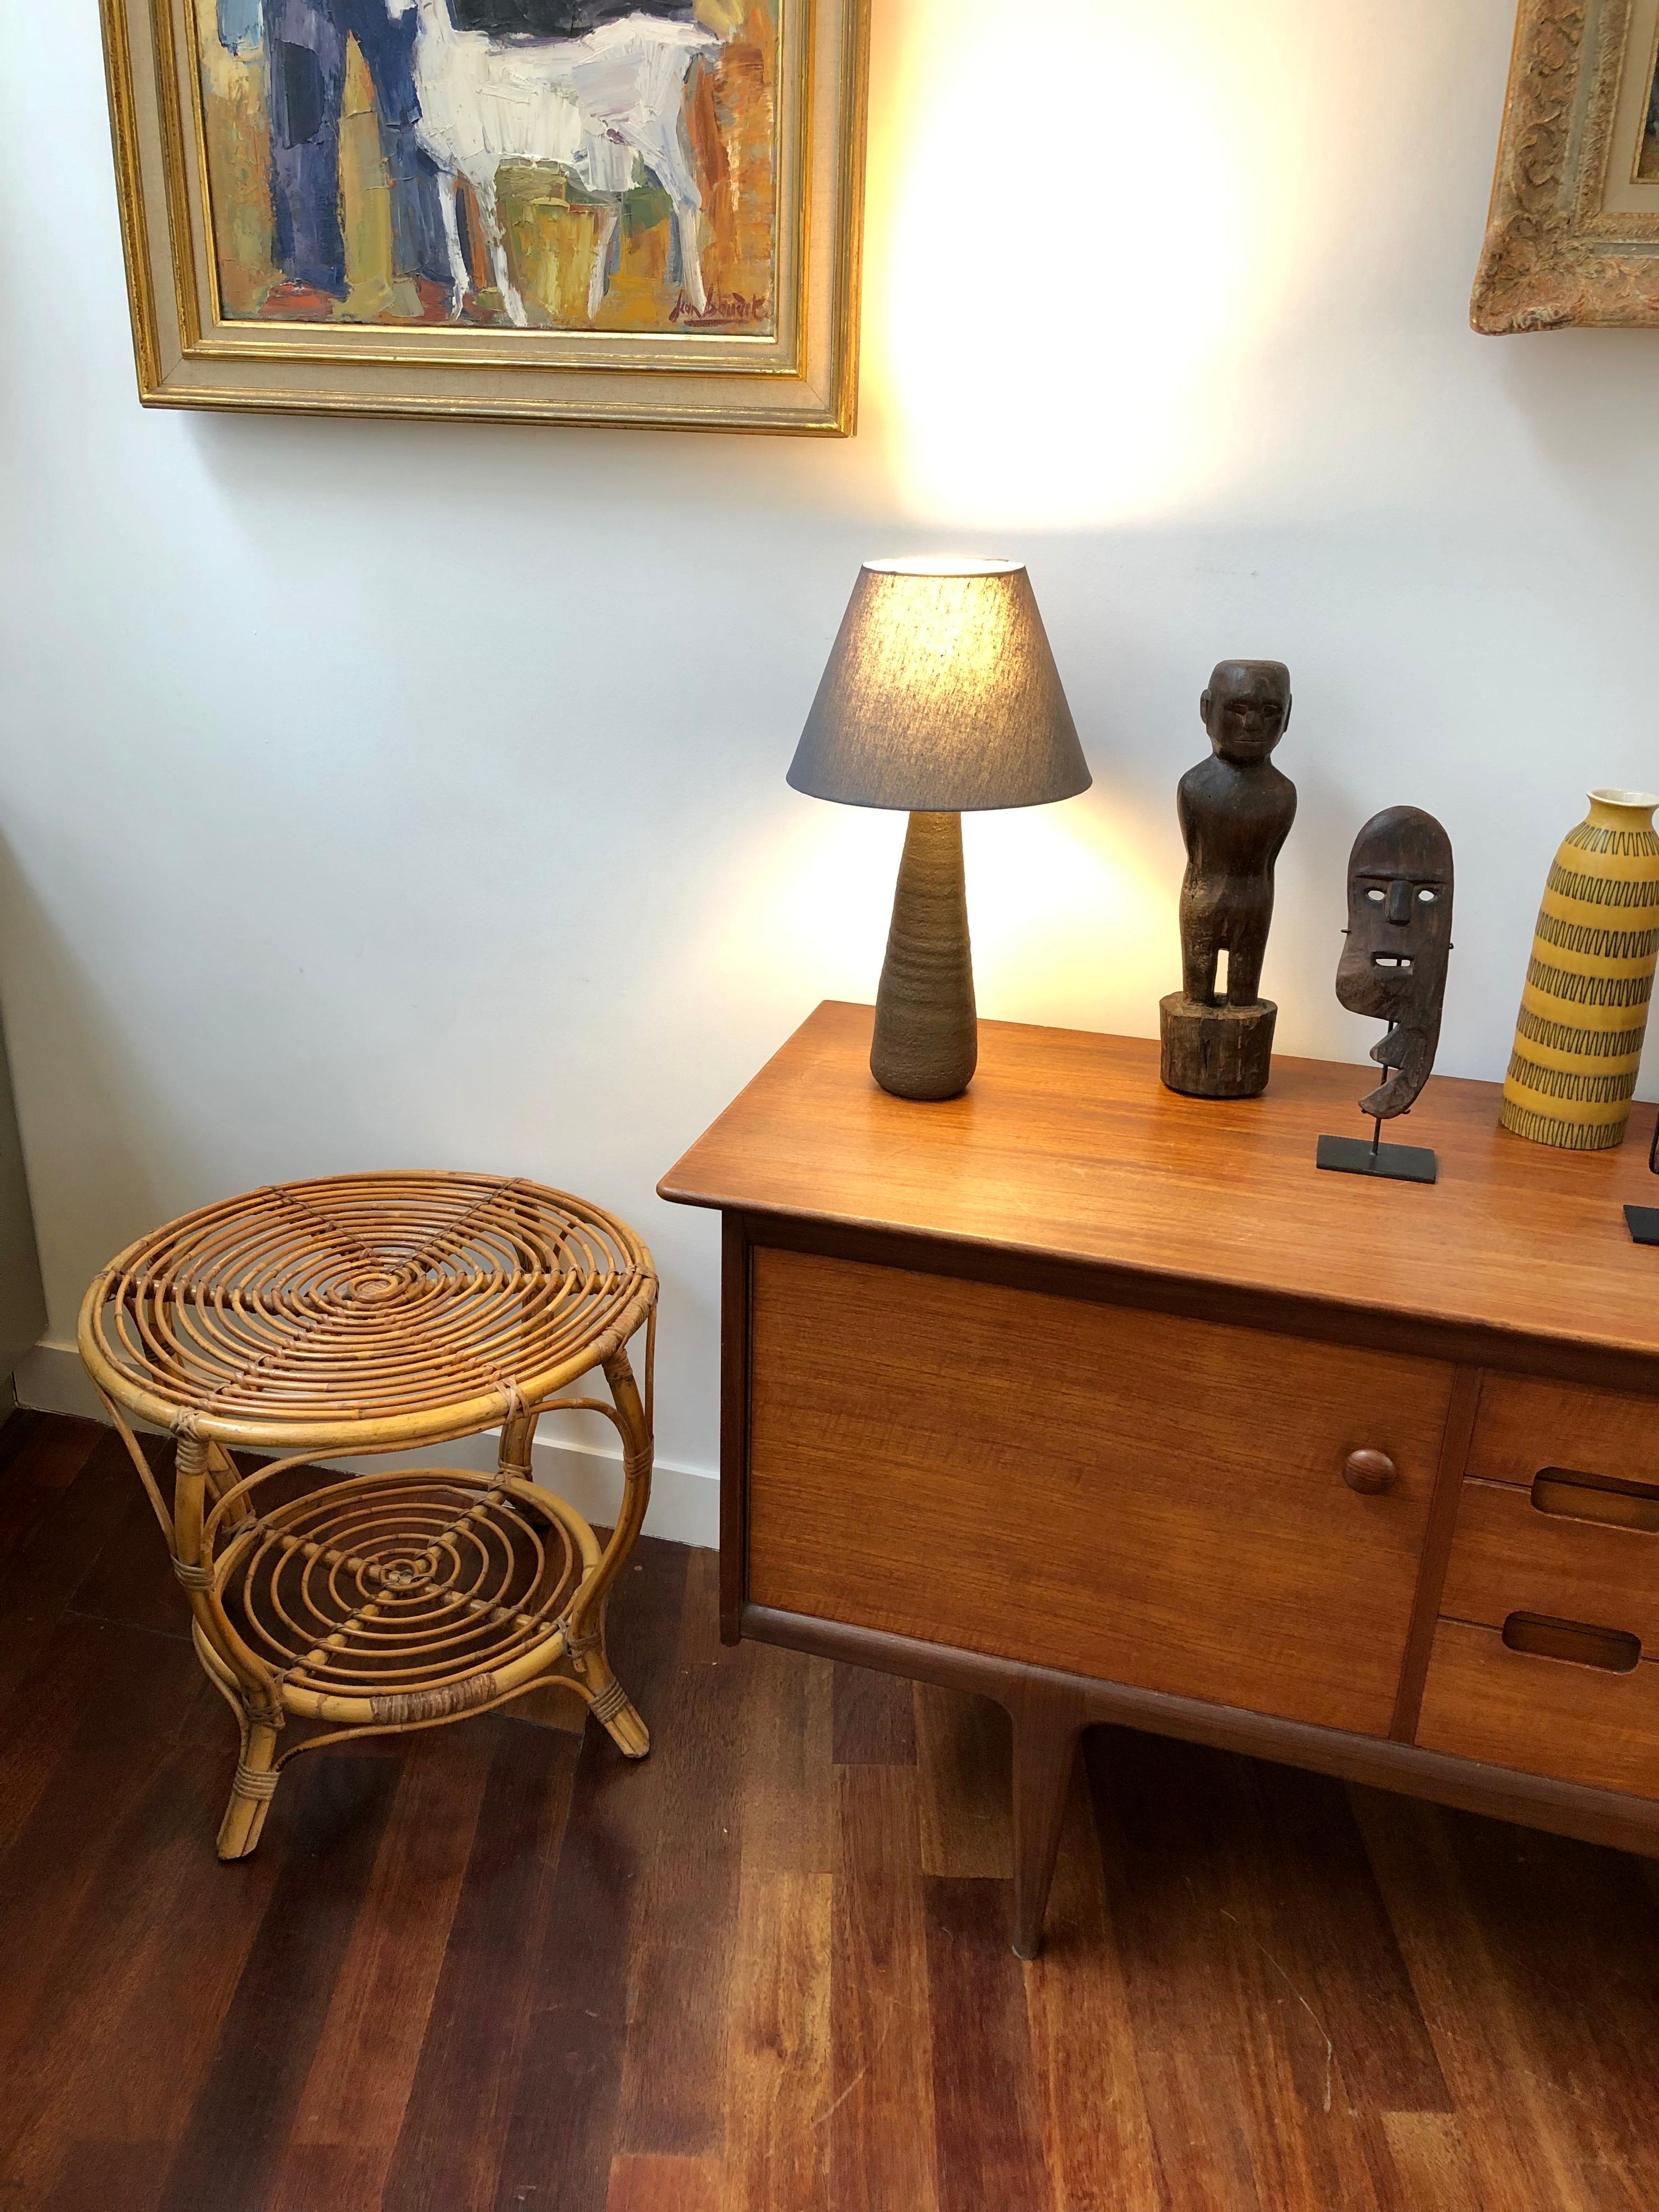 Italian rattan coffee / end table (circa 1960s). A very stylish piece with slews of character and charm. A rare rounded shape with two horizontal surfaces for storage or display set this characterful table apart from the others. The smart-looking